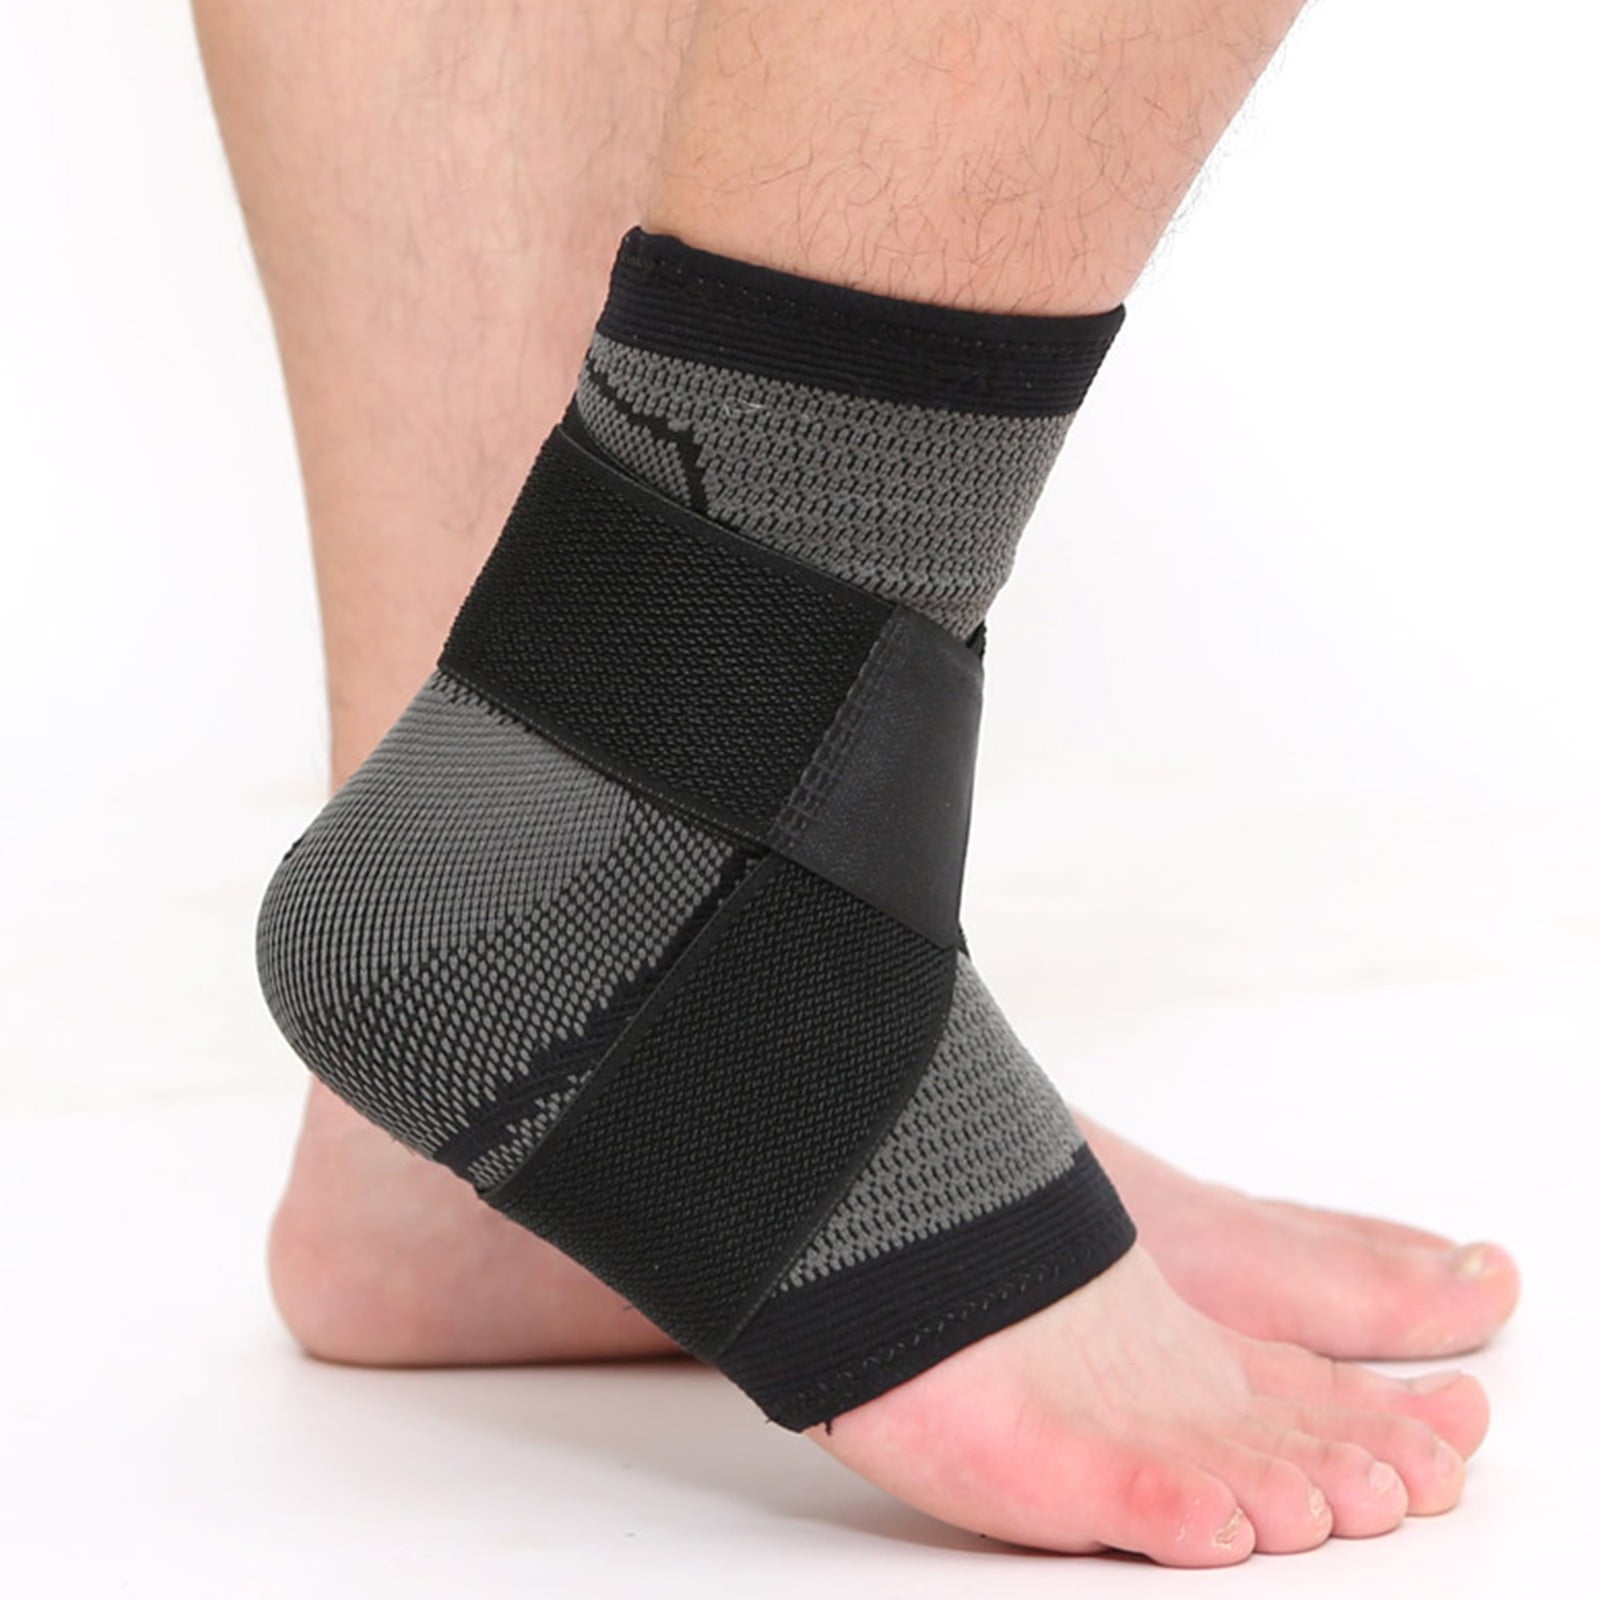 CFR Ankle Support Brace Compression Achilles Tendon Foot Sprains Injury Socks LC 